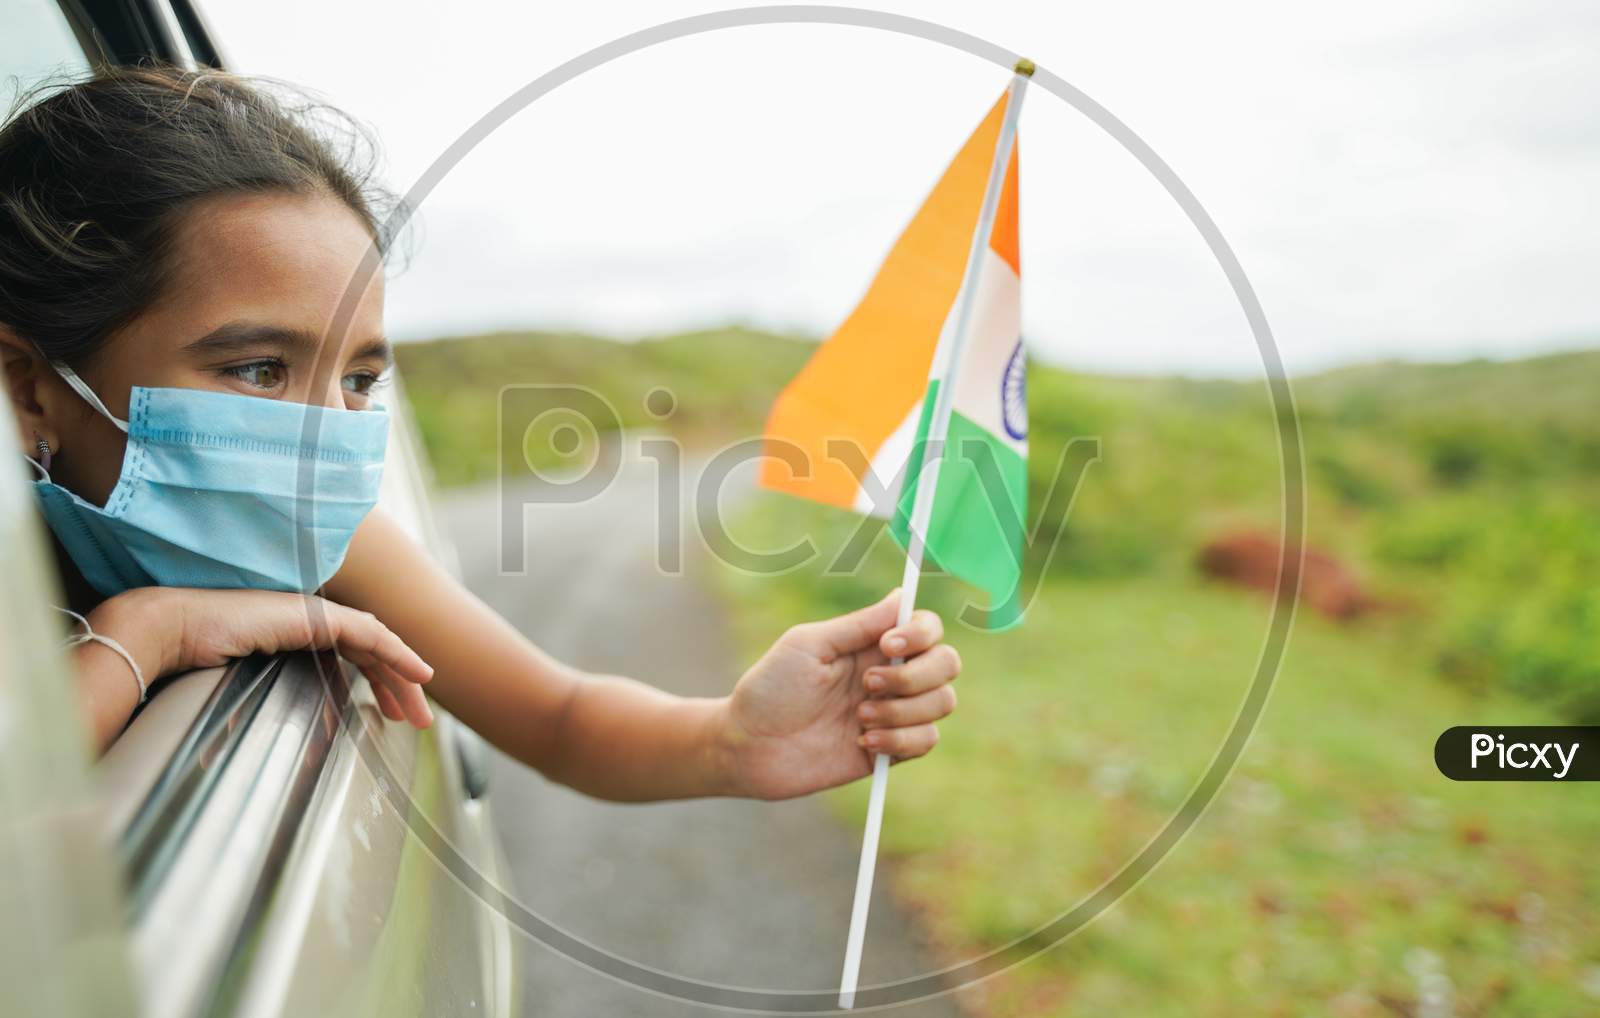 Young Girl Kid With Medical Mask Holding Indian Flag In Moving Car Window - Concept Of Celebrating Independence Or Republic Day During Coronavirus Or Covid-19 Pandemic